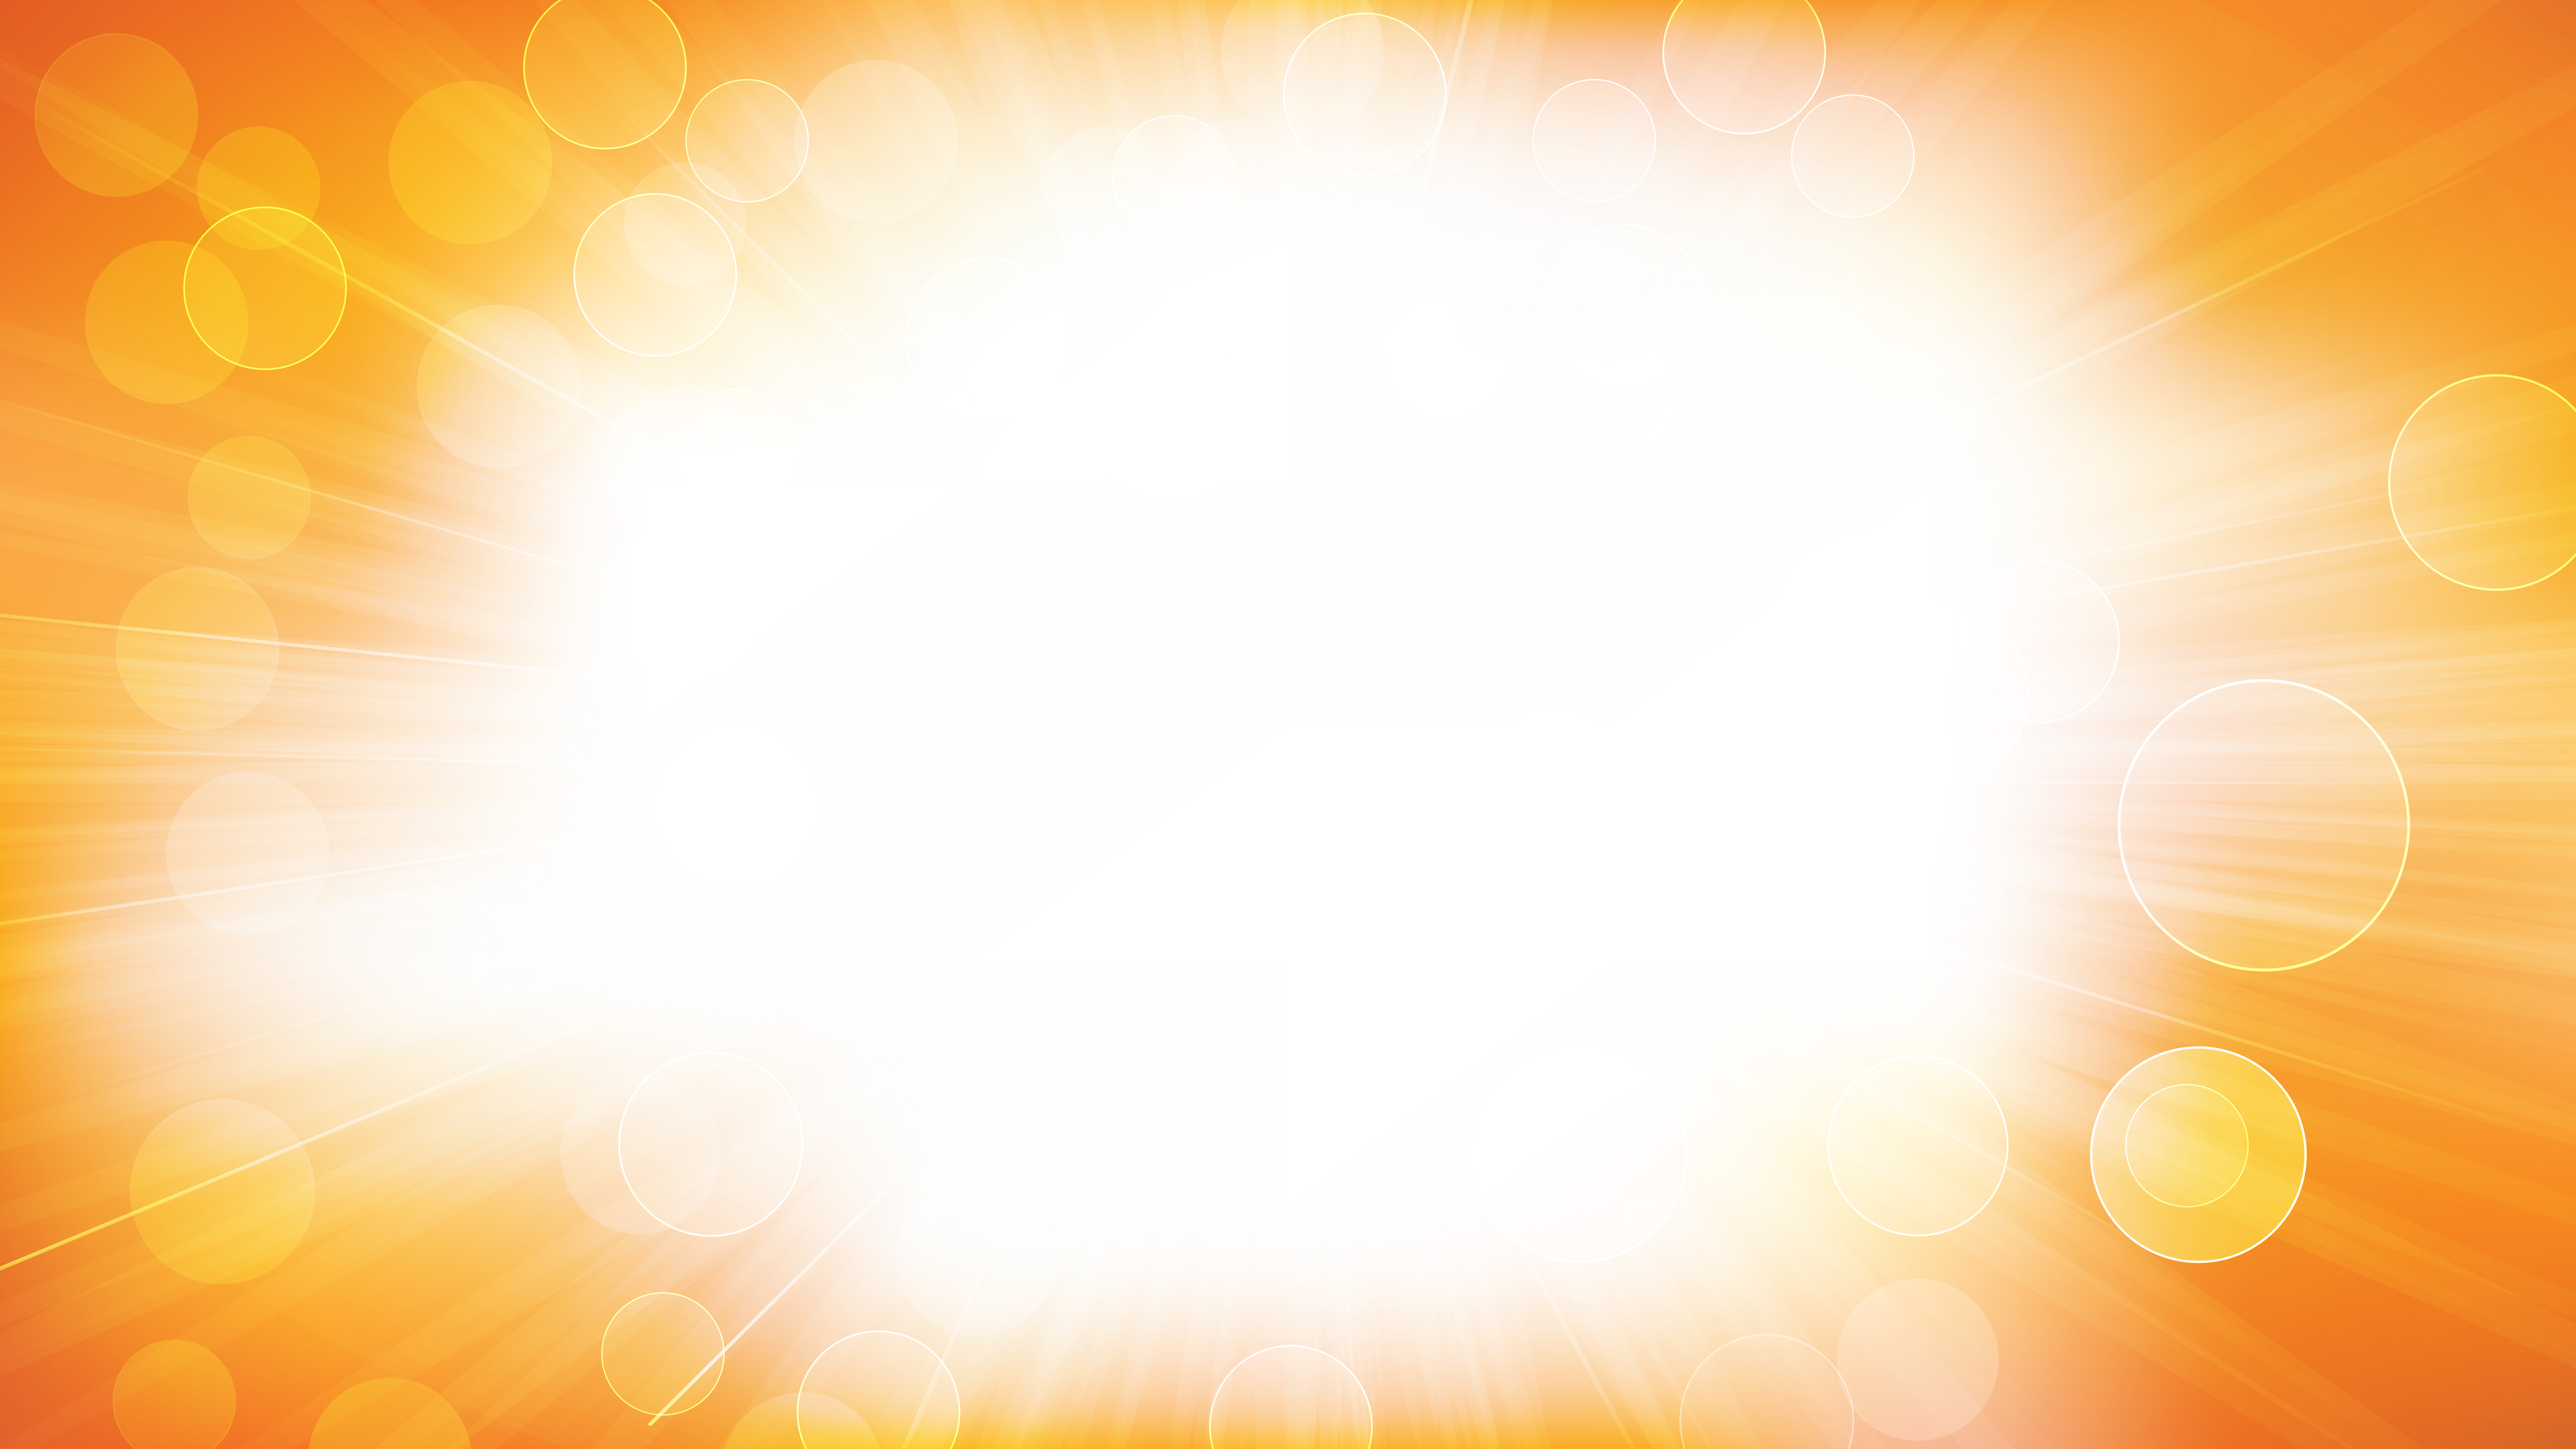 Free Abstract Orange and White Bokeh Lights Background with Sun Rays Design